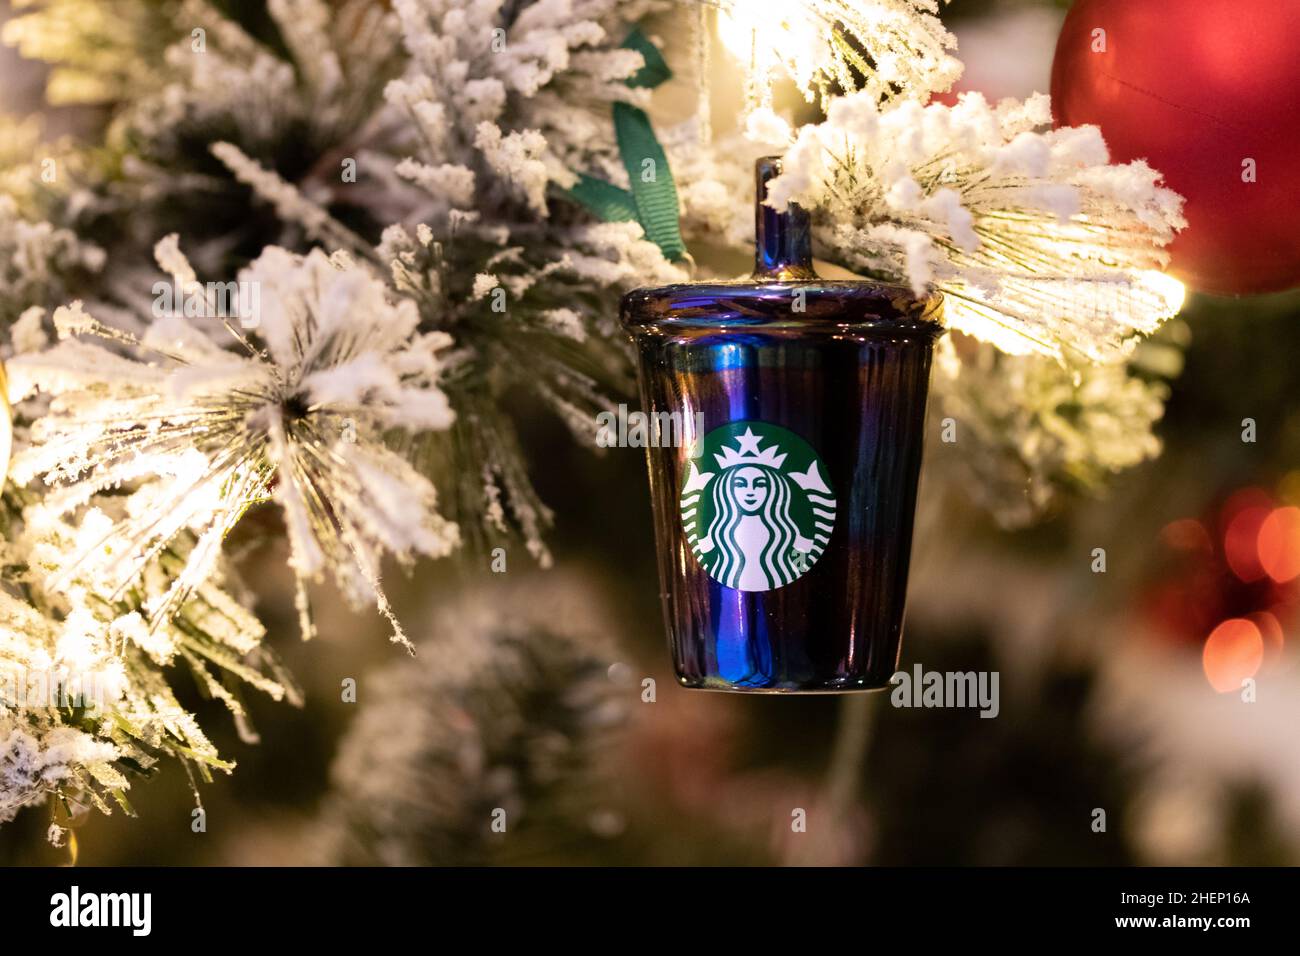 A Starbucks Christmas ordainment is seen on a Christmas tree at a Coffeehouse during the holiday season. Stock Photo